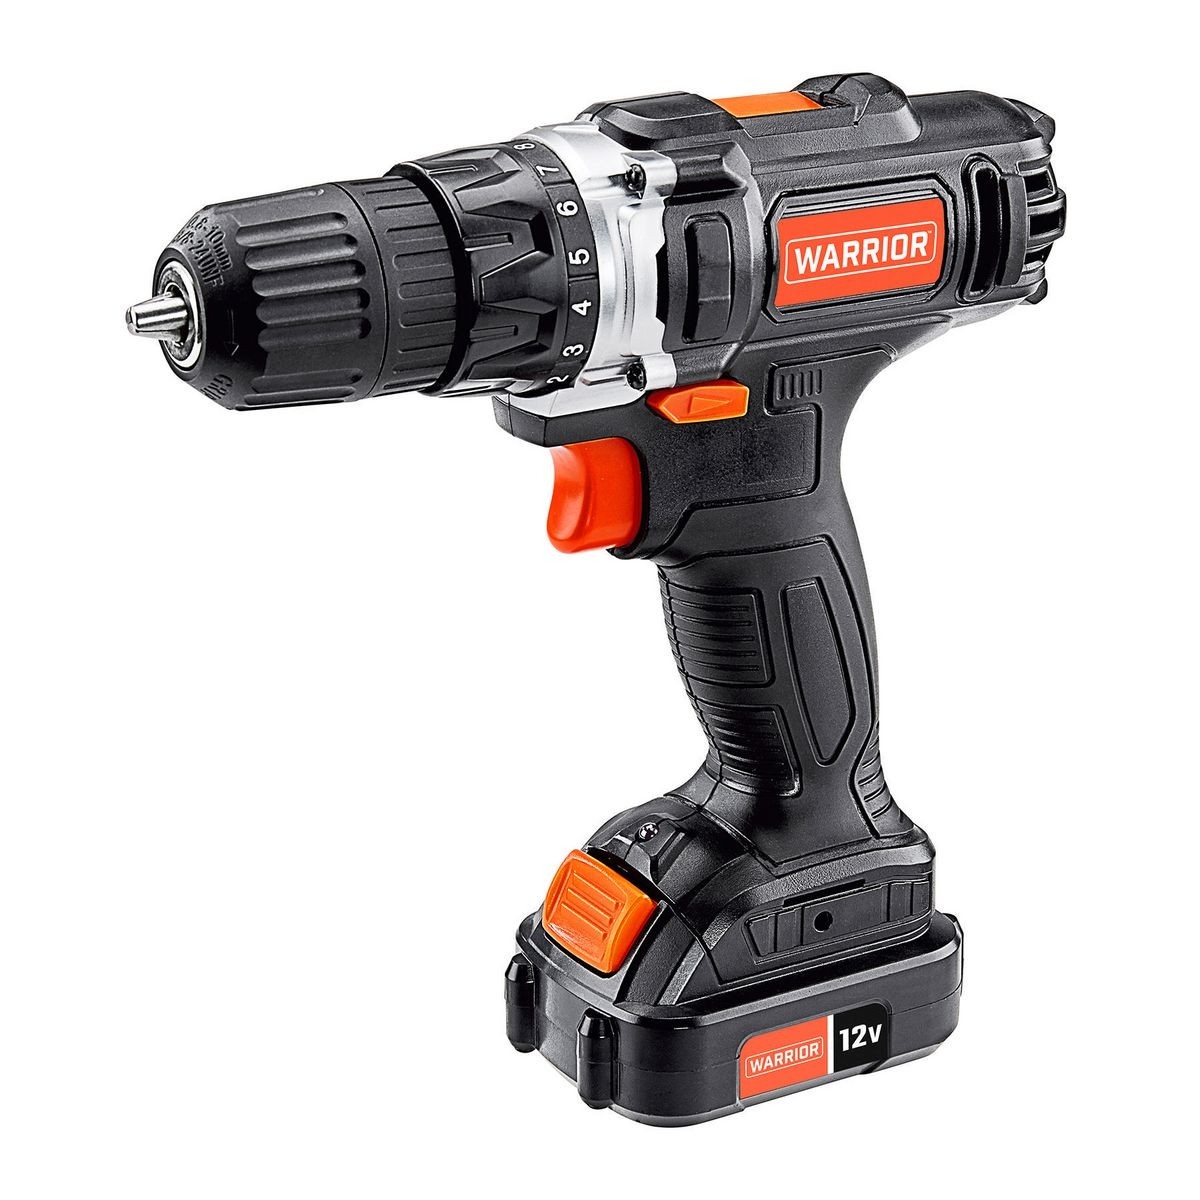 WARRIOR 12v Lithium-Ion 3/8 In. Cordless Drill/Driver – Item 57366